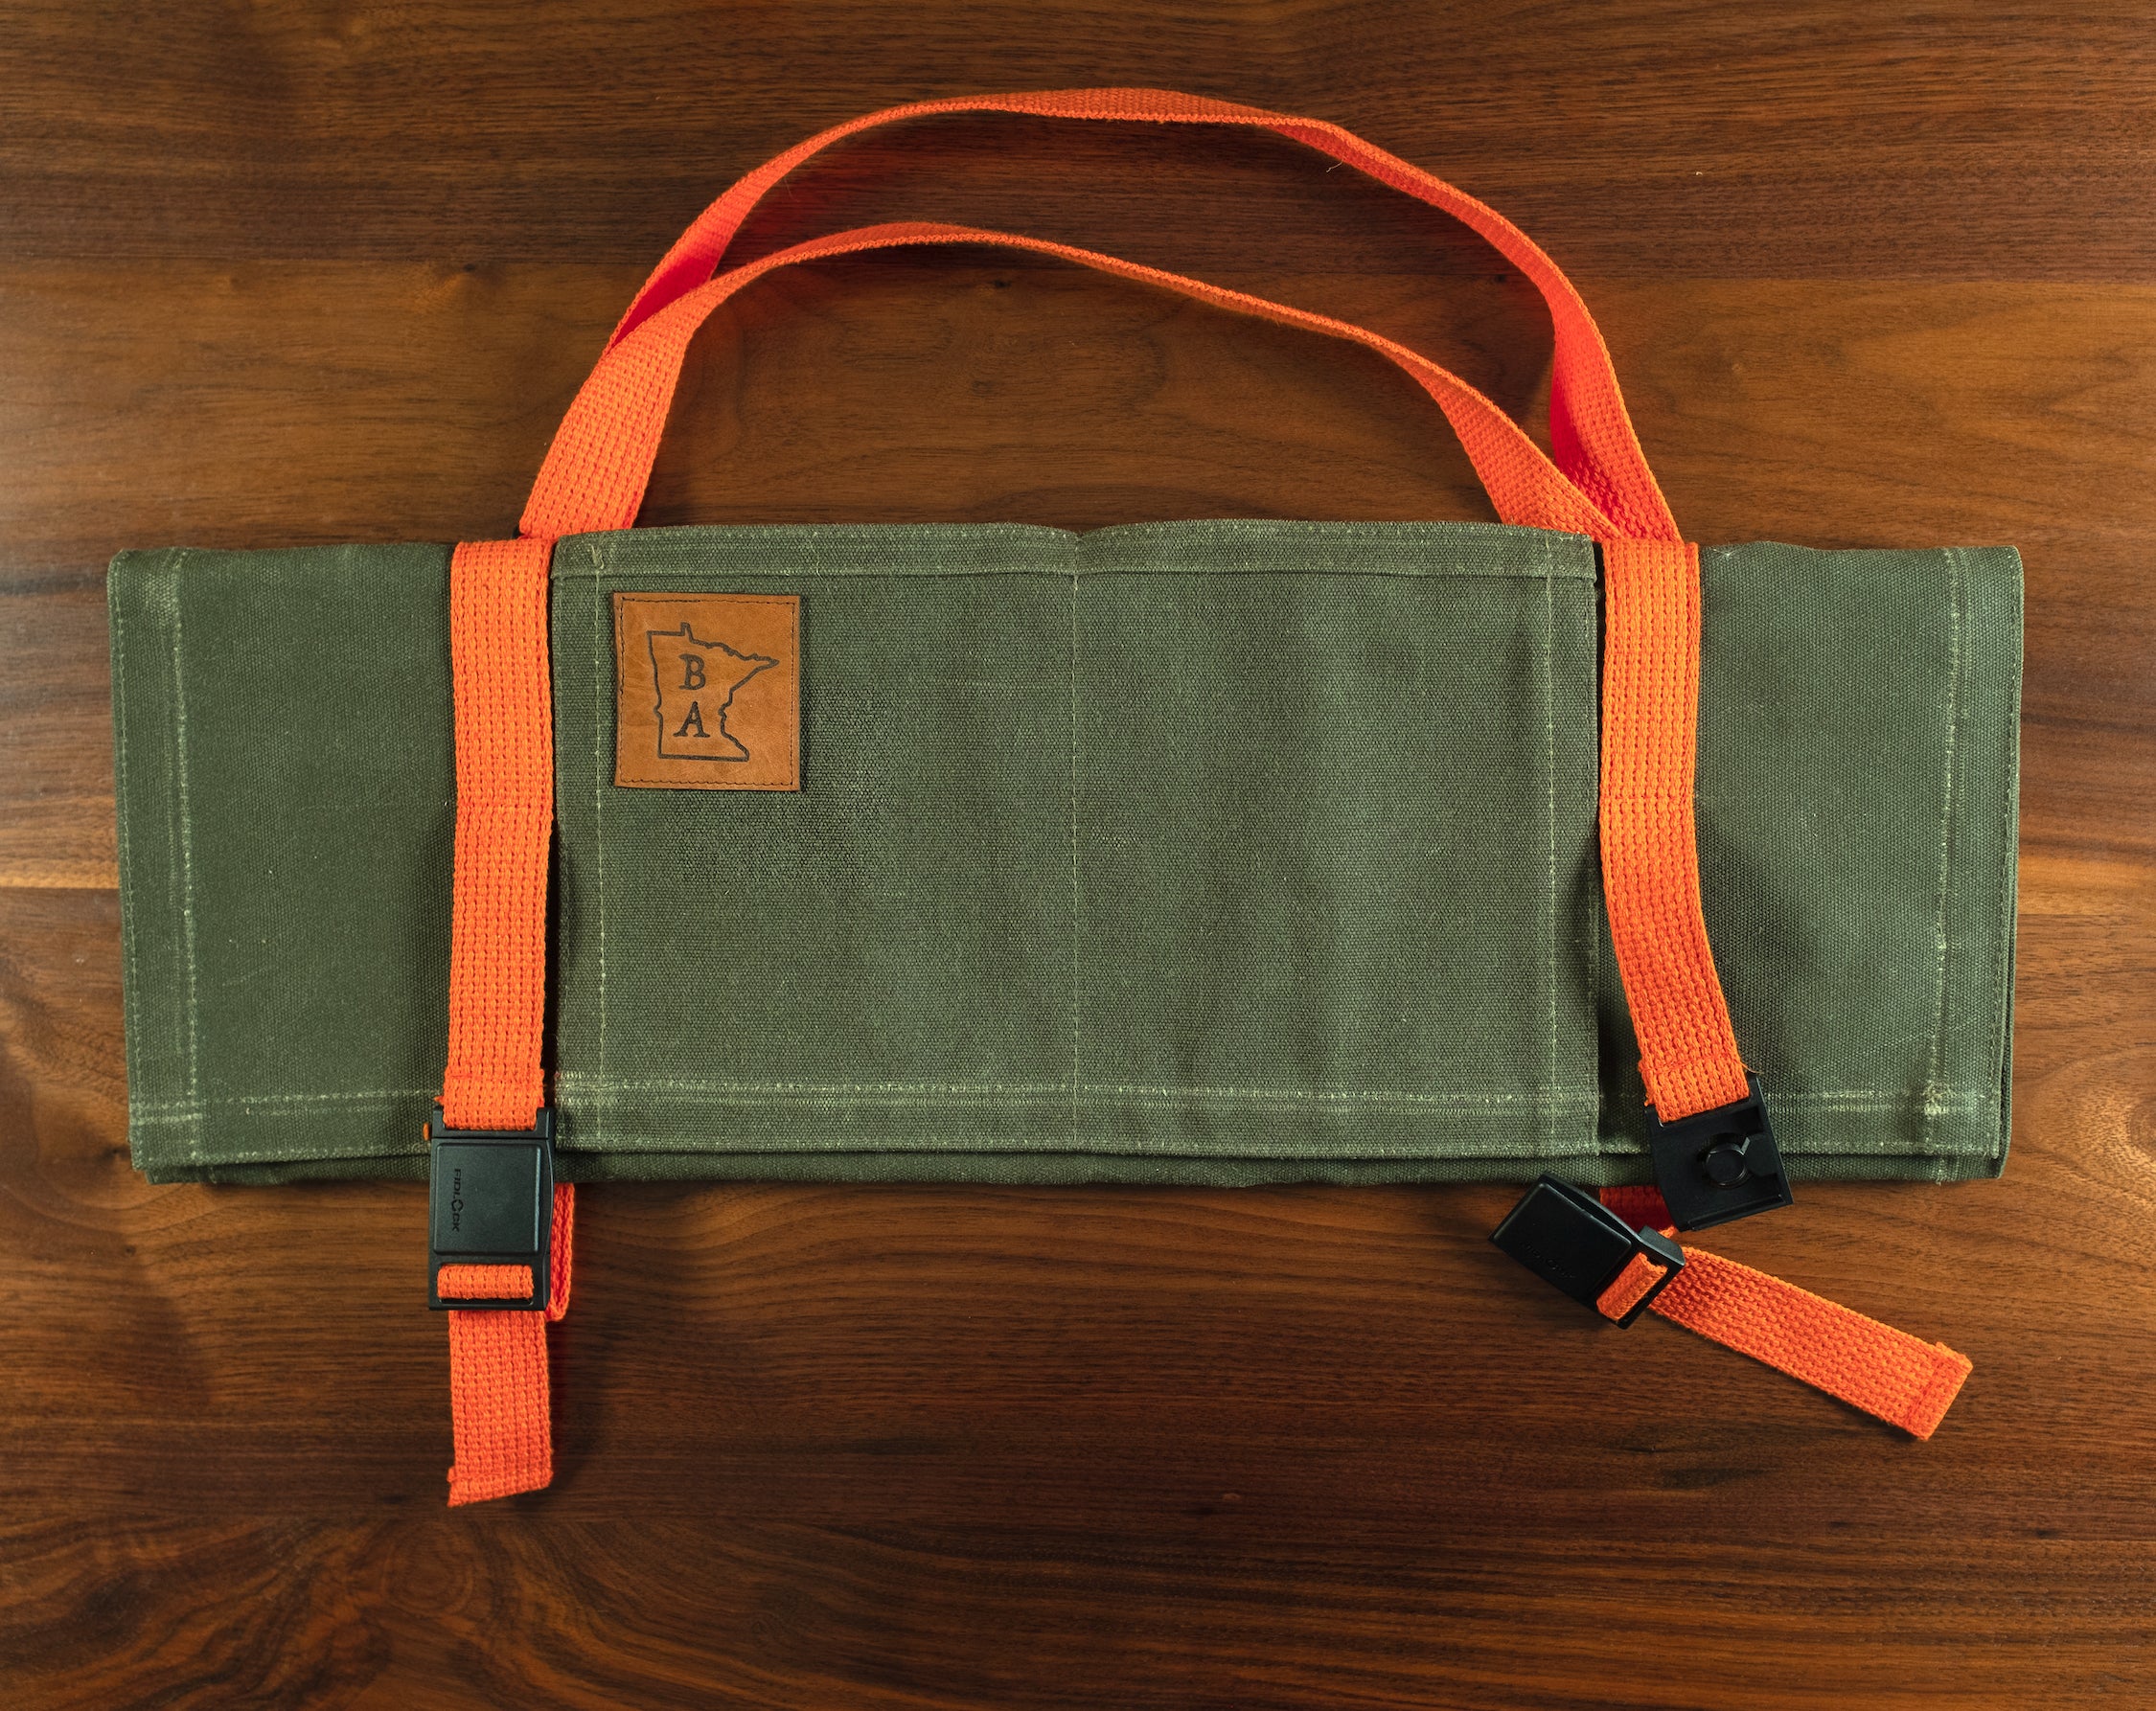 The Main Squeeze olive green cotton knife roll folded on a wooden surface with the buckles released. The knife roll was designed and produced by Craftmade Aprons in Minnesota.